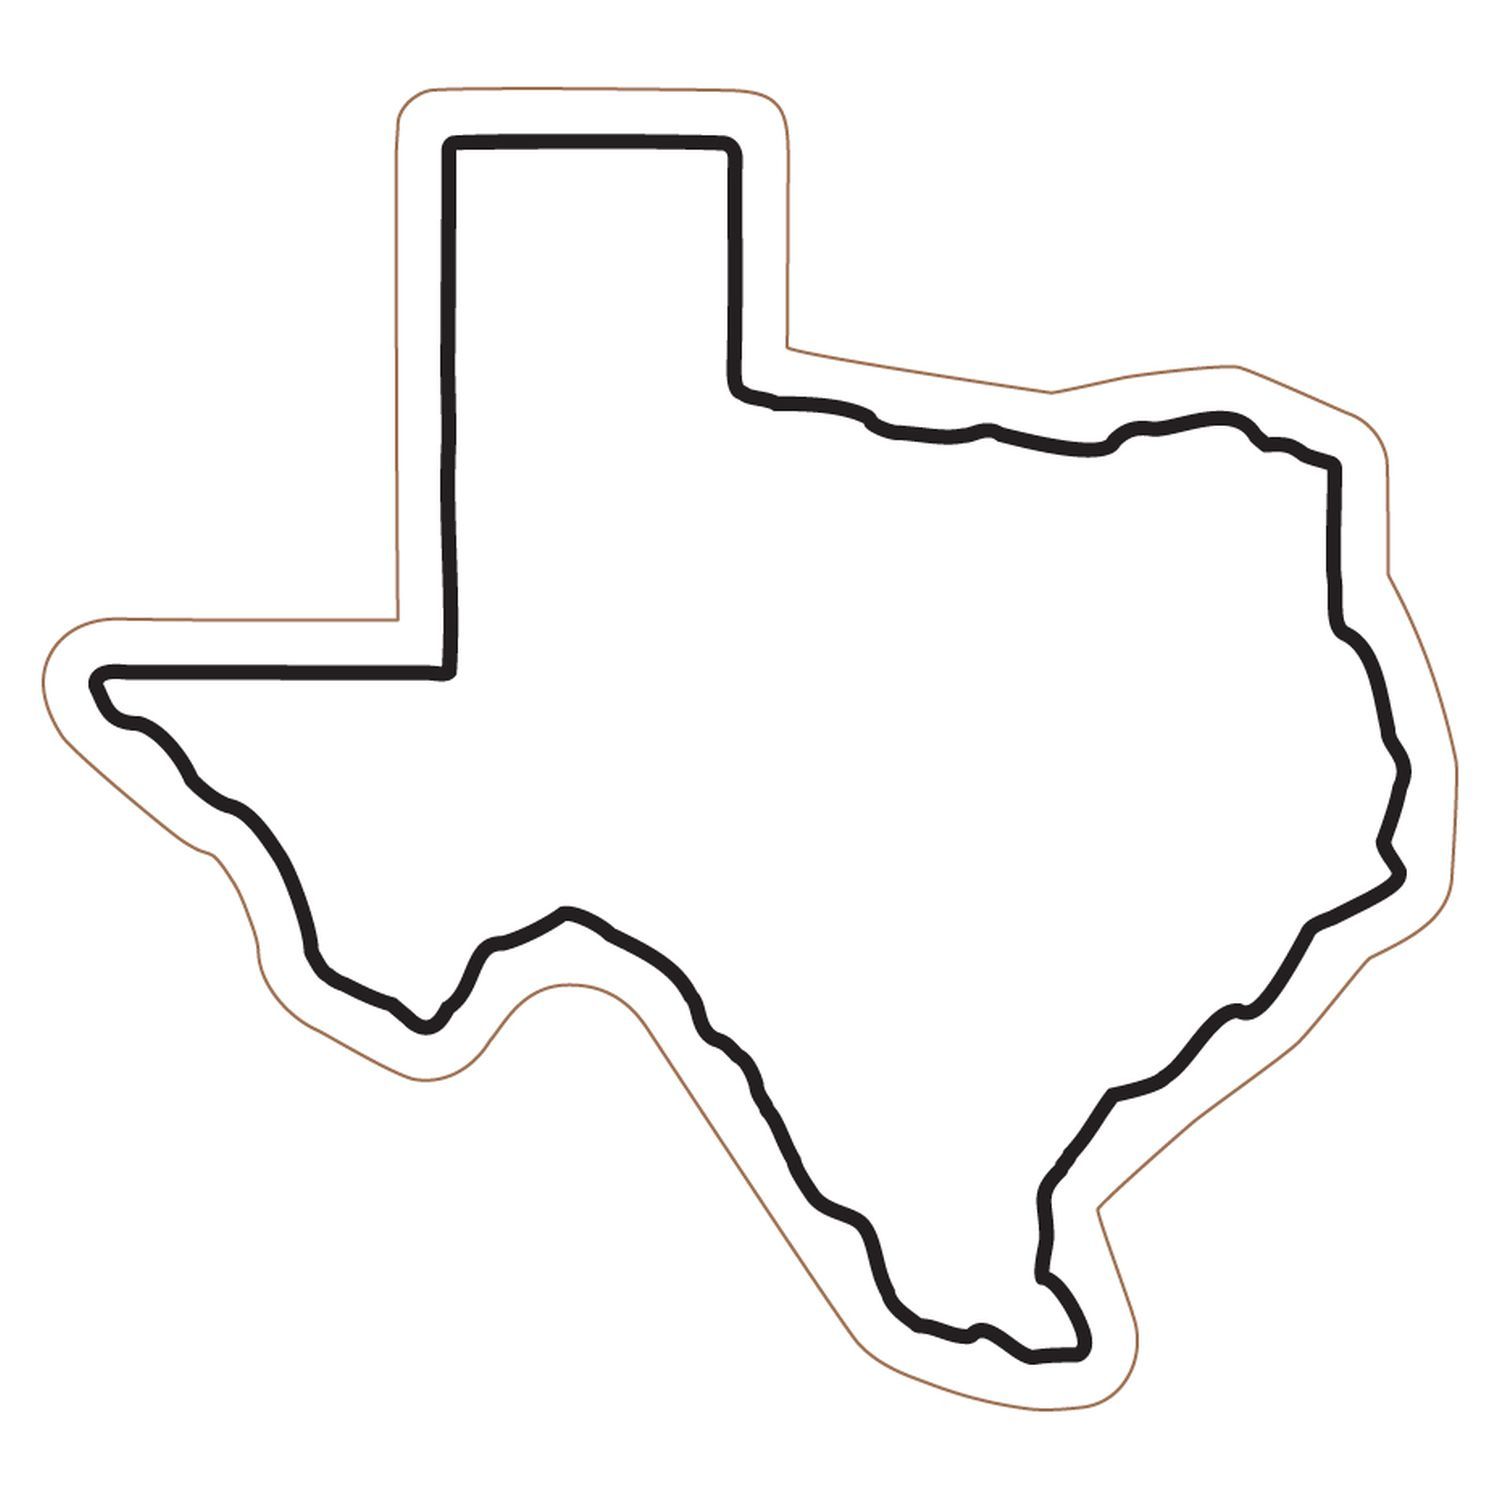 clipart map of texas - photo #36